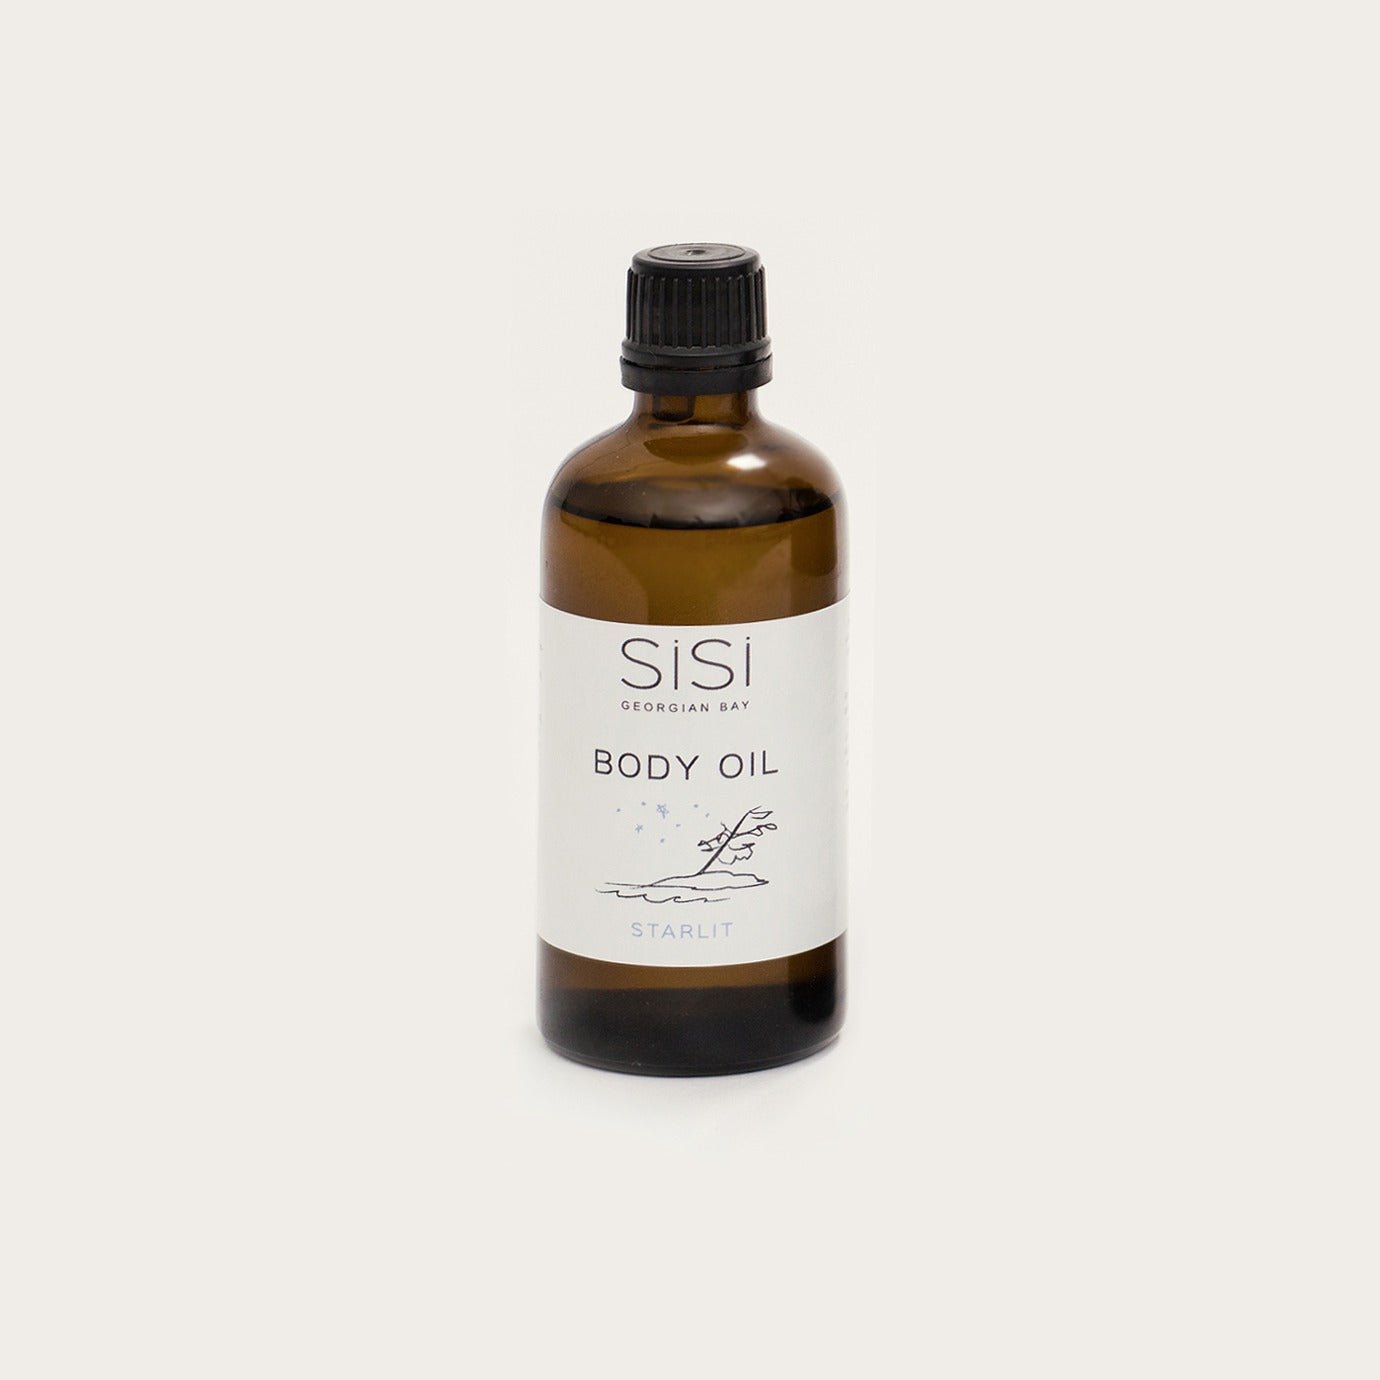 Starlit body oil in a 4oz amber glass bottle on a creamy white background